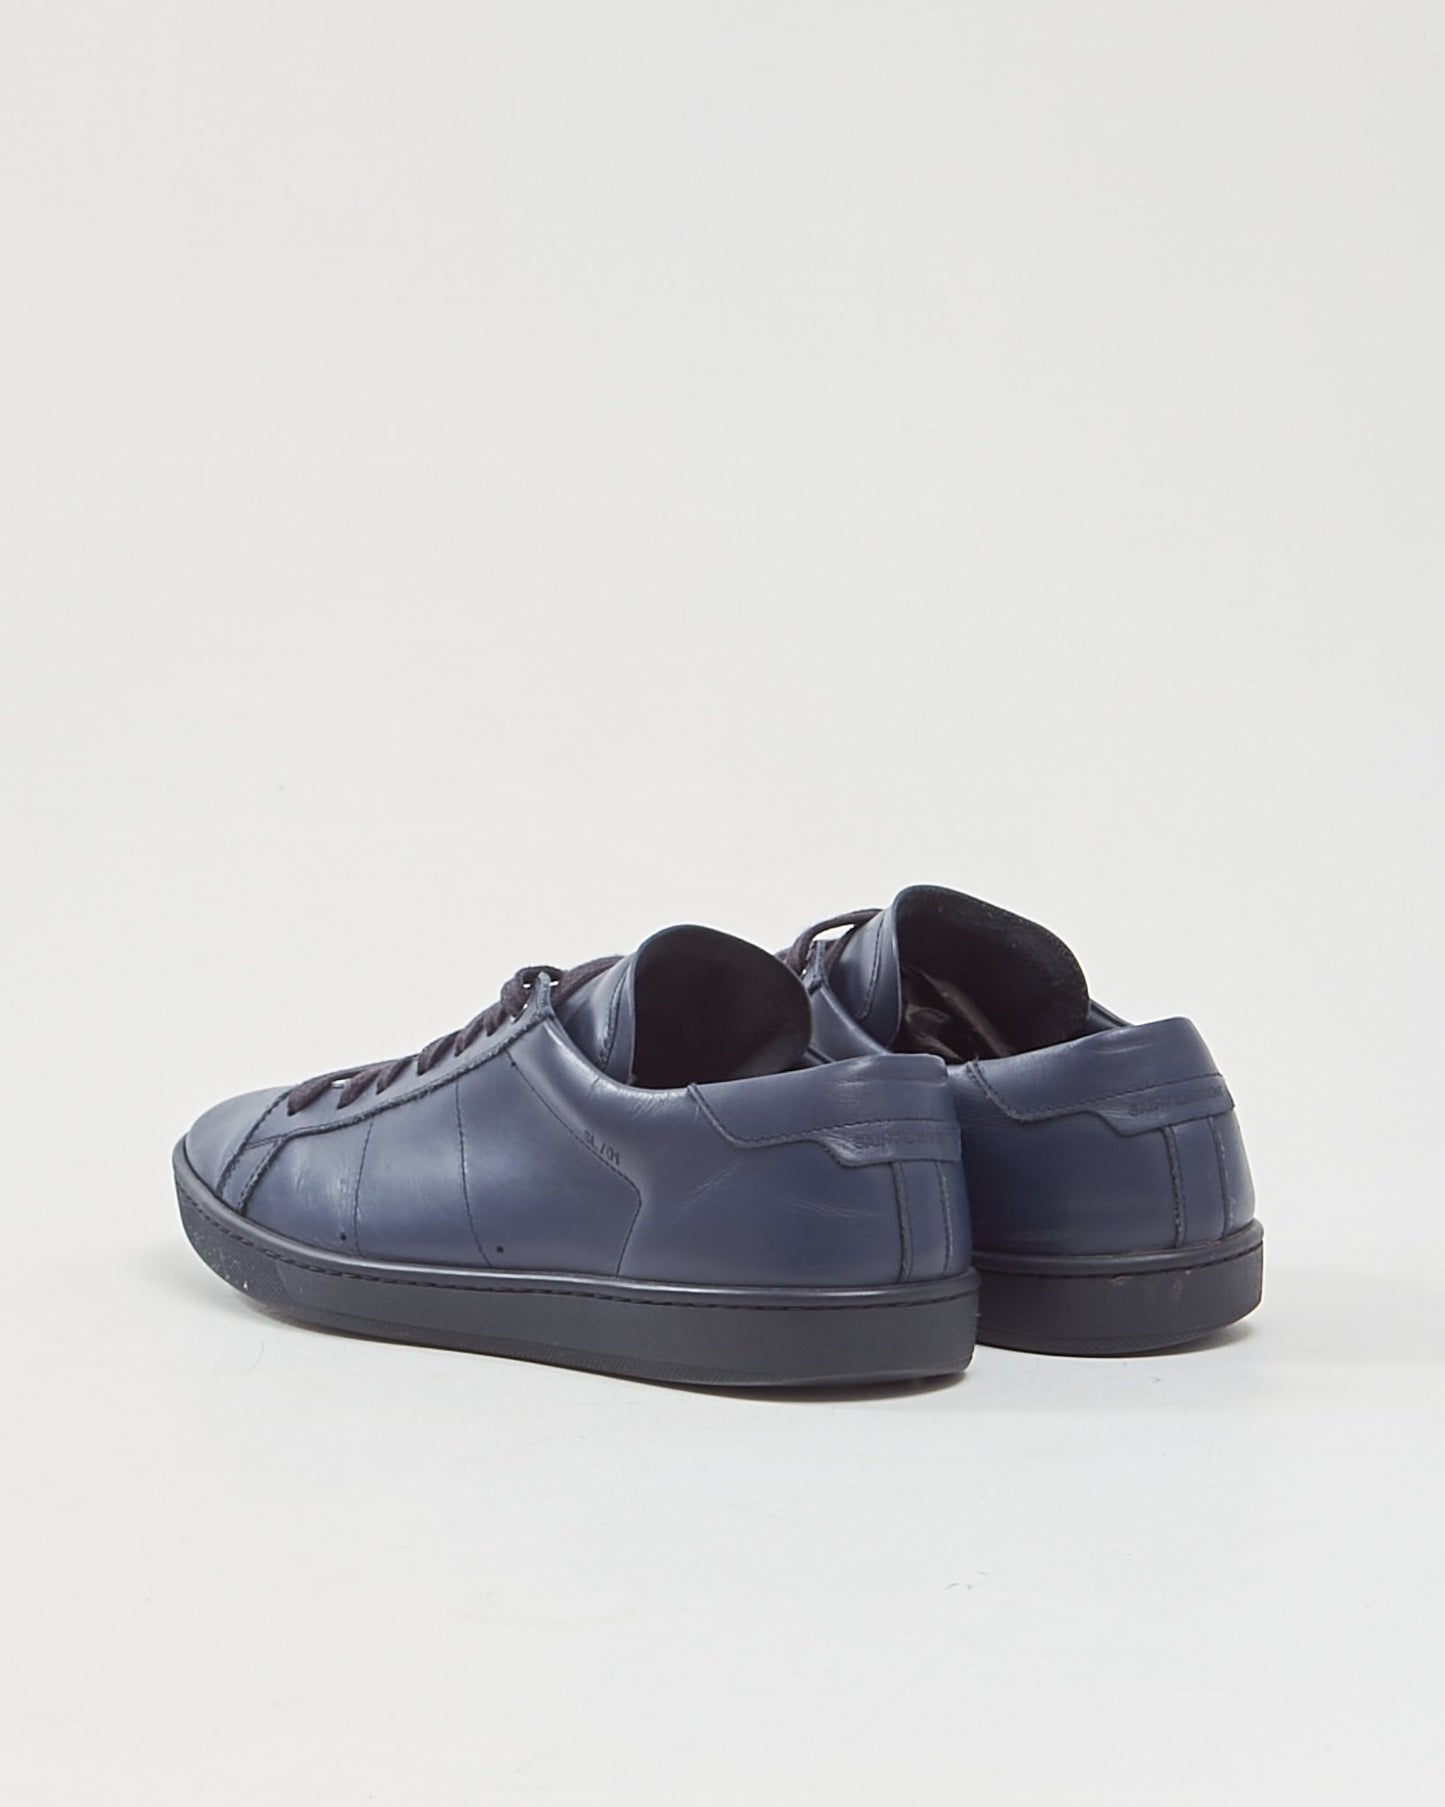 Saint Laurent Navy Leather Andy Sneakers - 42